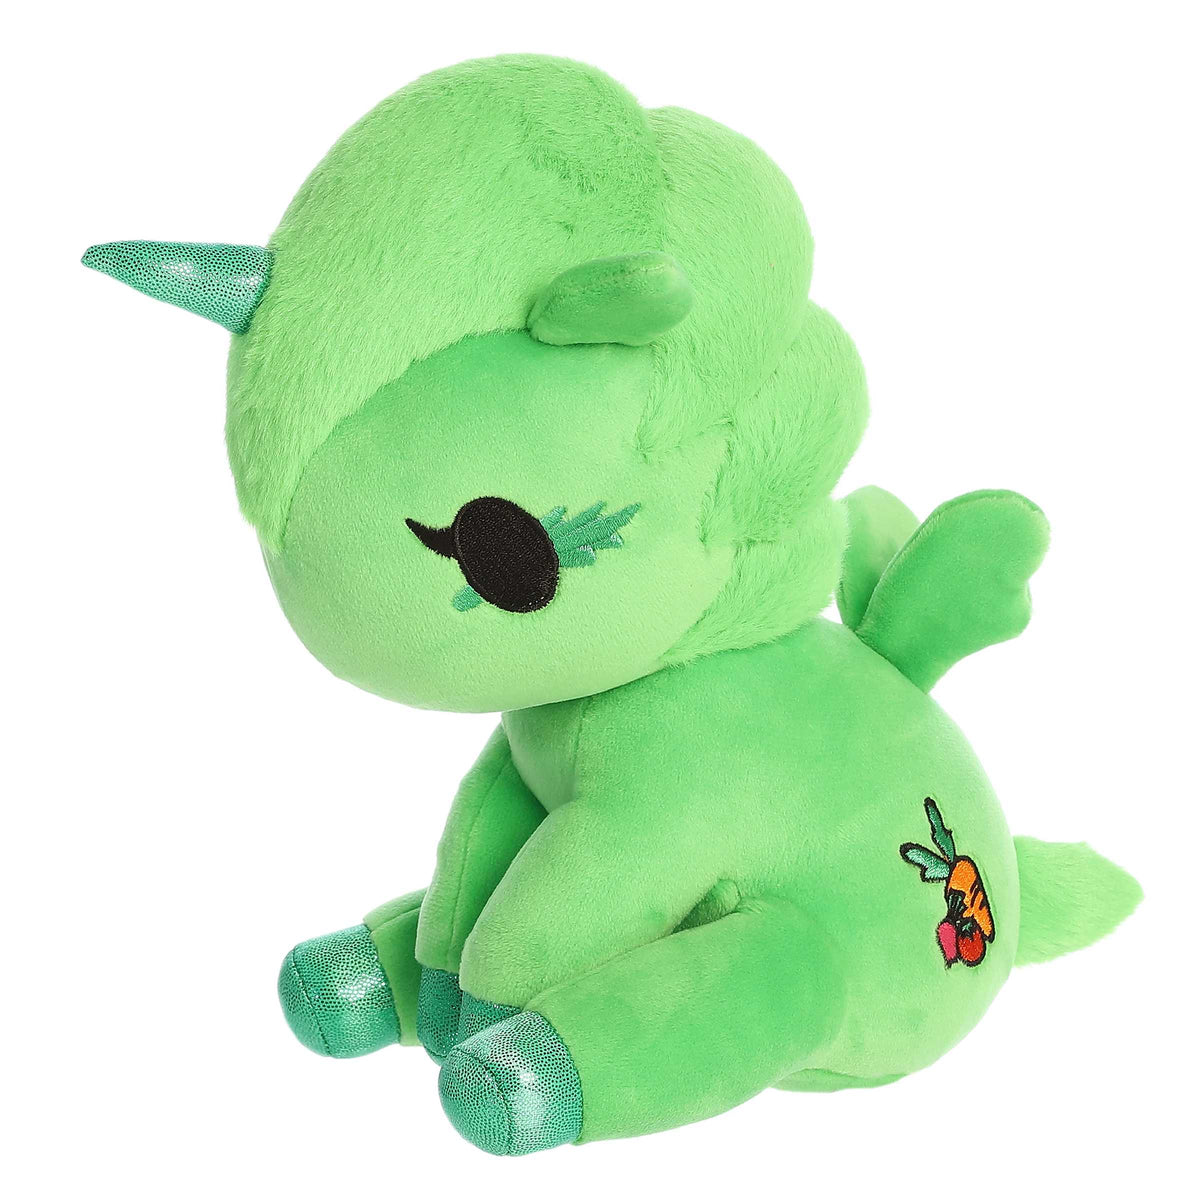 Unicorno plush, with a green body, angelic wings, and sparkly horn, inspires playful adventures by Aurora tokidoki plush.